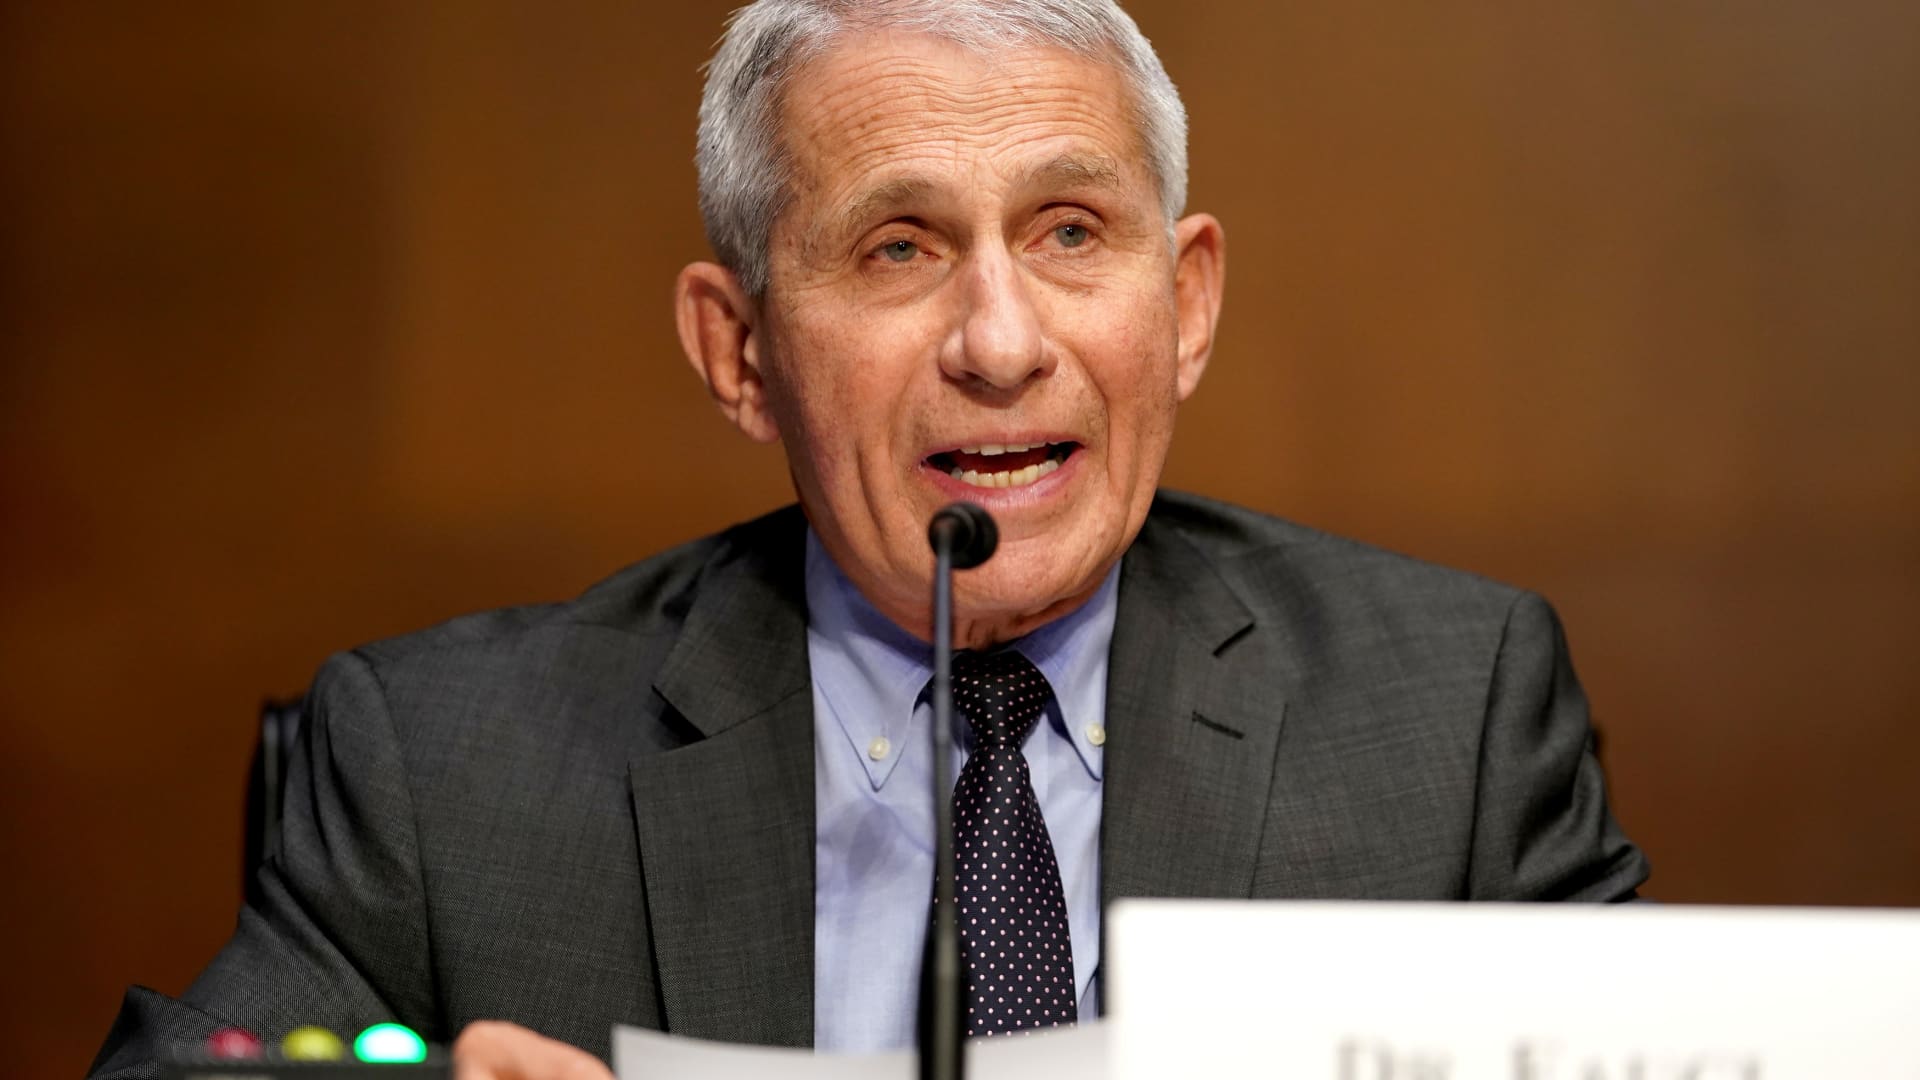 Dr. Anthony Fauci, director of the National Institute of Allergy and Infectious Diseases, gives an opening statement during a Senate Health, Education, Labor and Pensions Committee hearing to discuss the on-going federal response to COVID-19, at the U.S. Capitol in Washington, D.C., May 11, 2021.